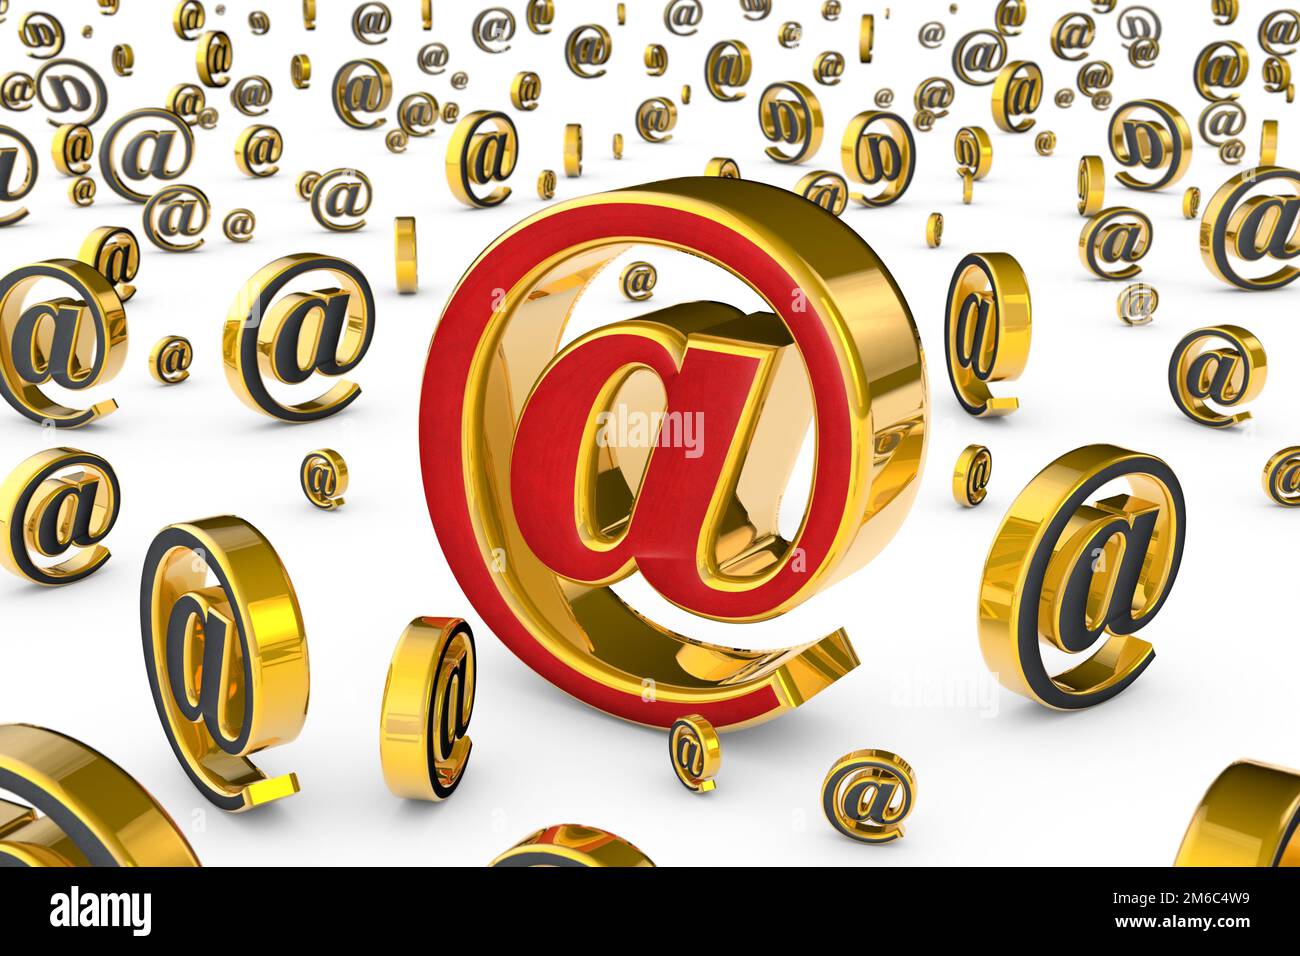 The main internet address (@). A single red  golden email symbol surrounded by many gray  gold e-mail symbols (3D illustration). Stock Photo